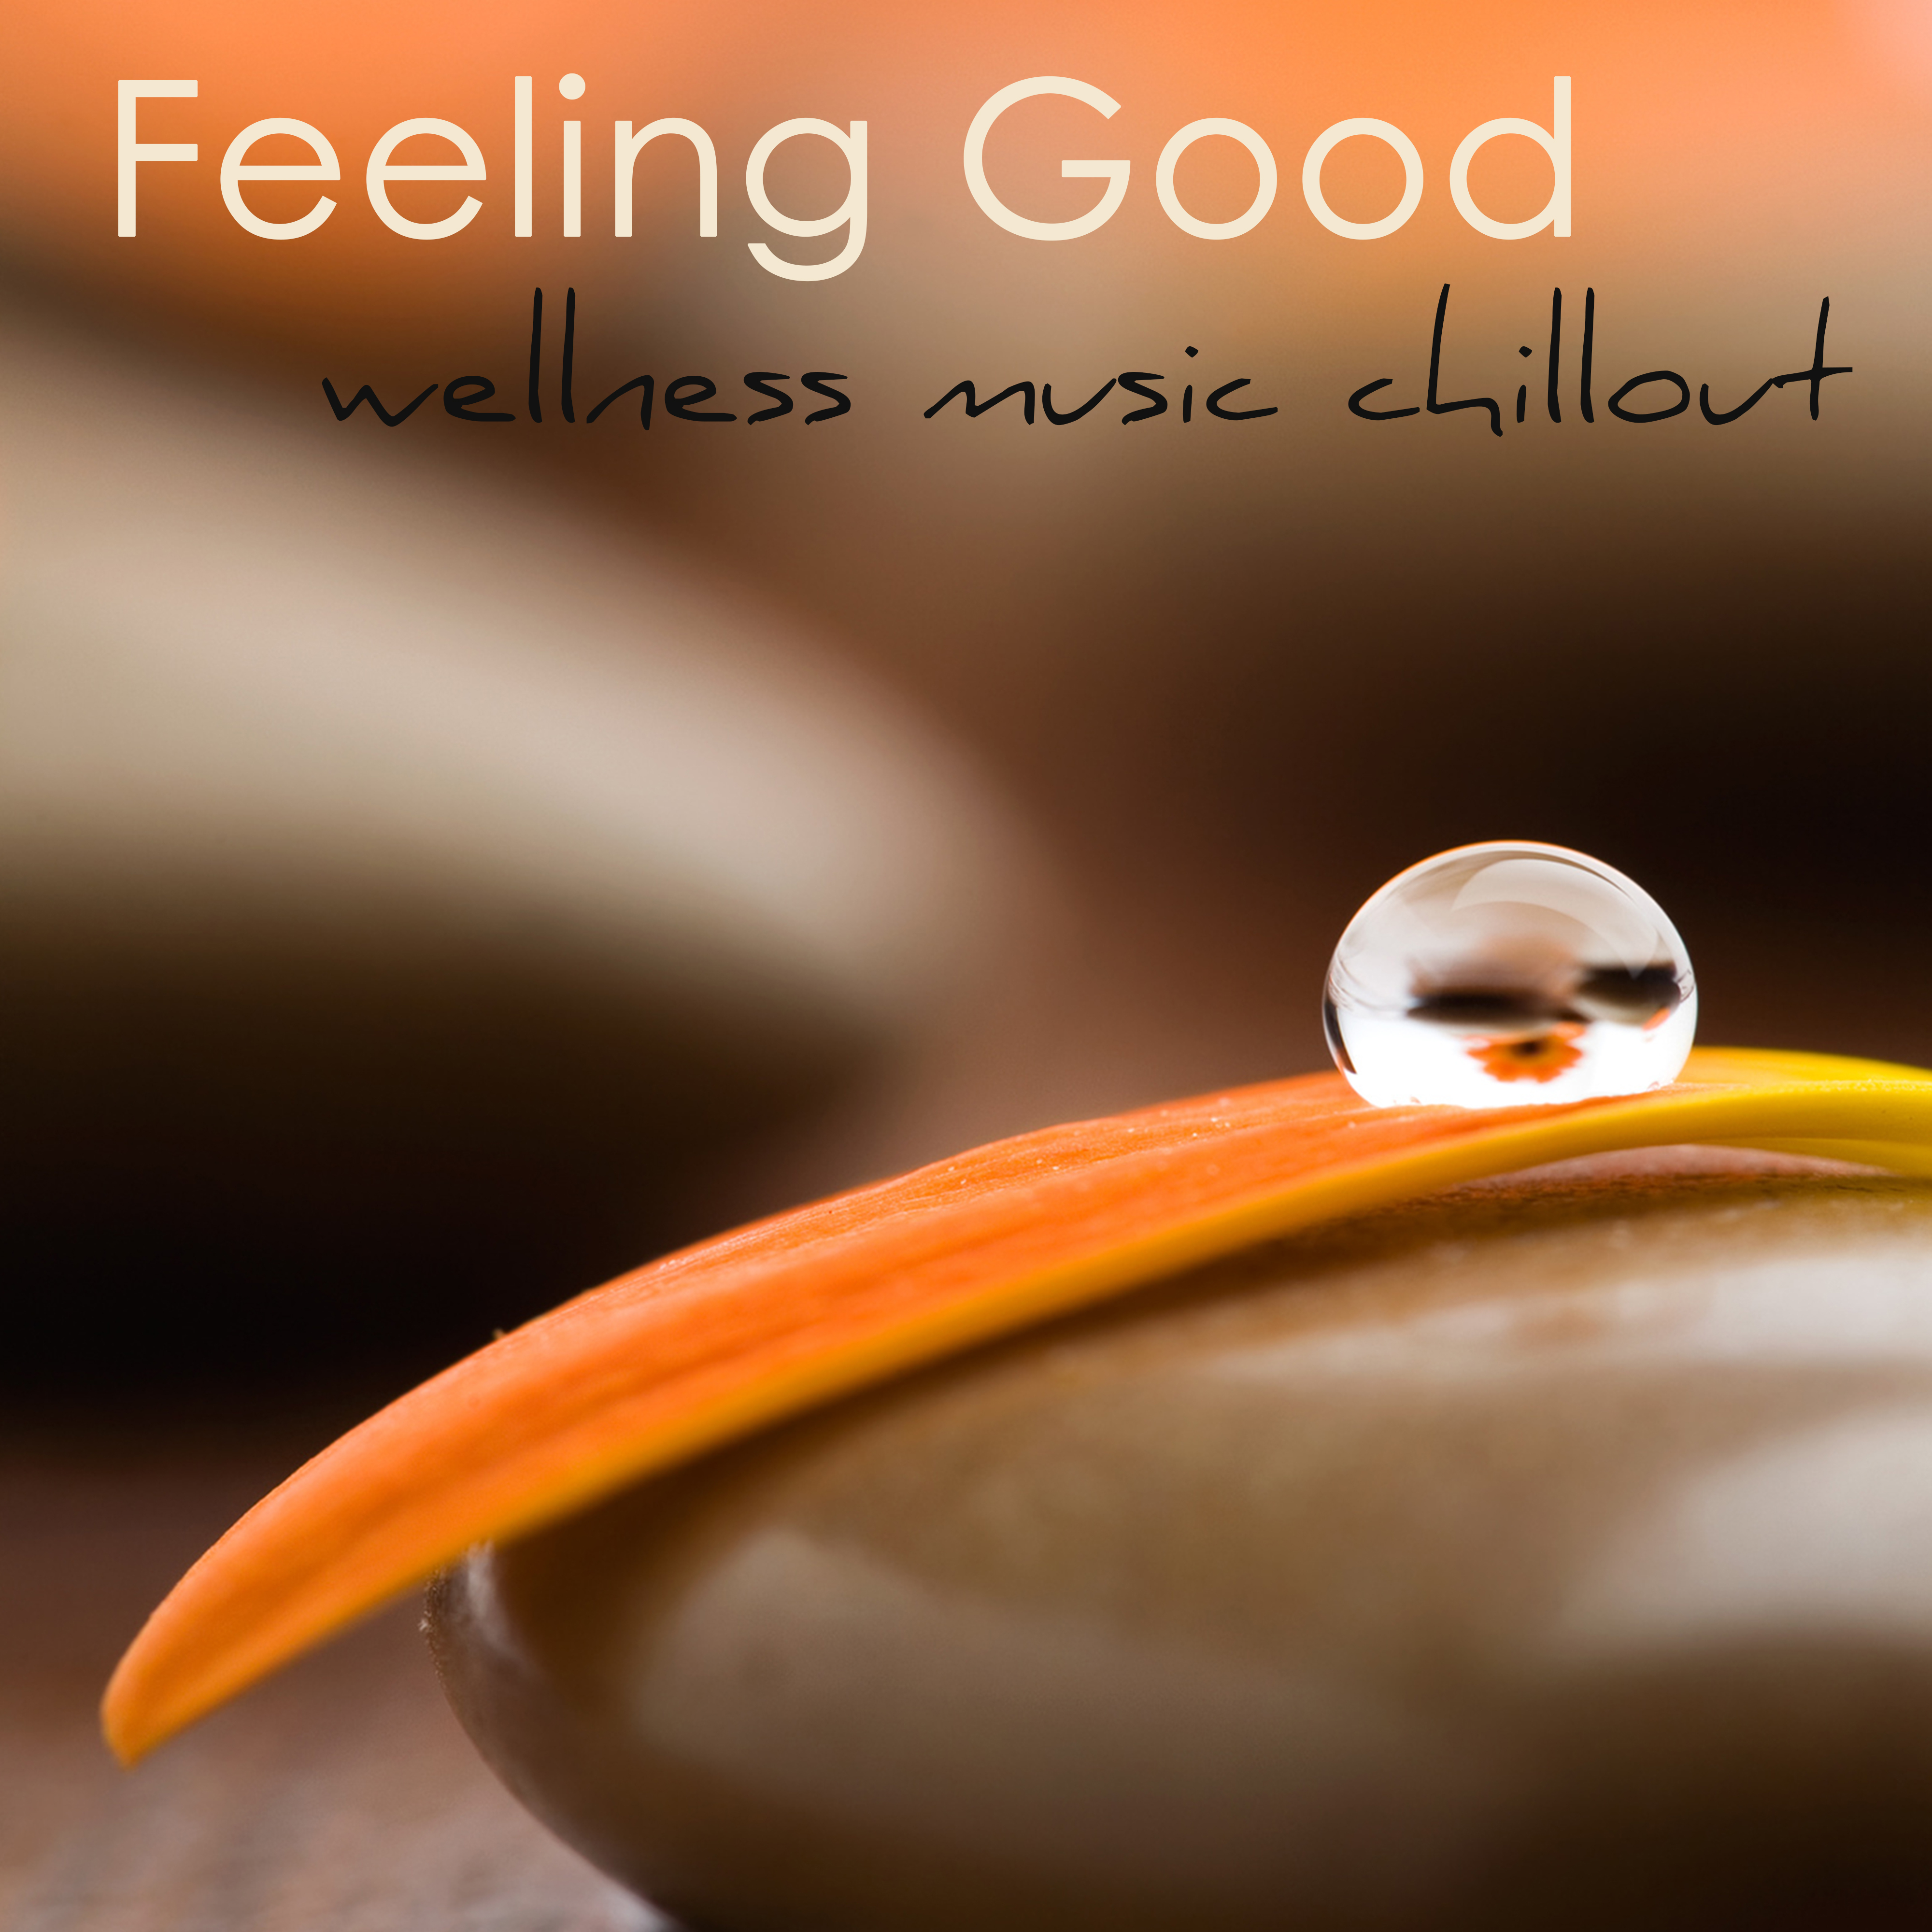 Feeling Good  Wellness Music Chillout for Beauty Spa, Massage, WellBeing, Relaxation  Vital Energy